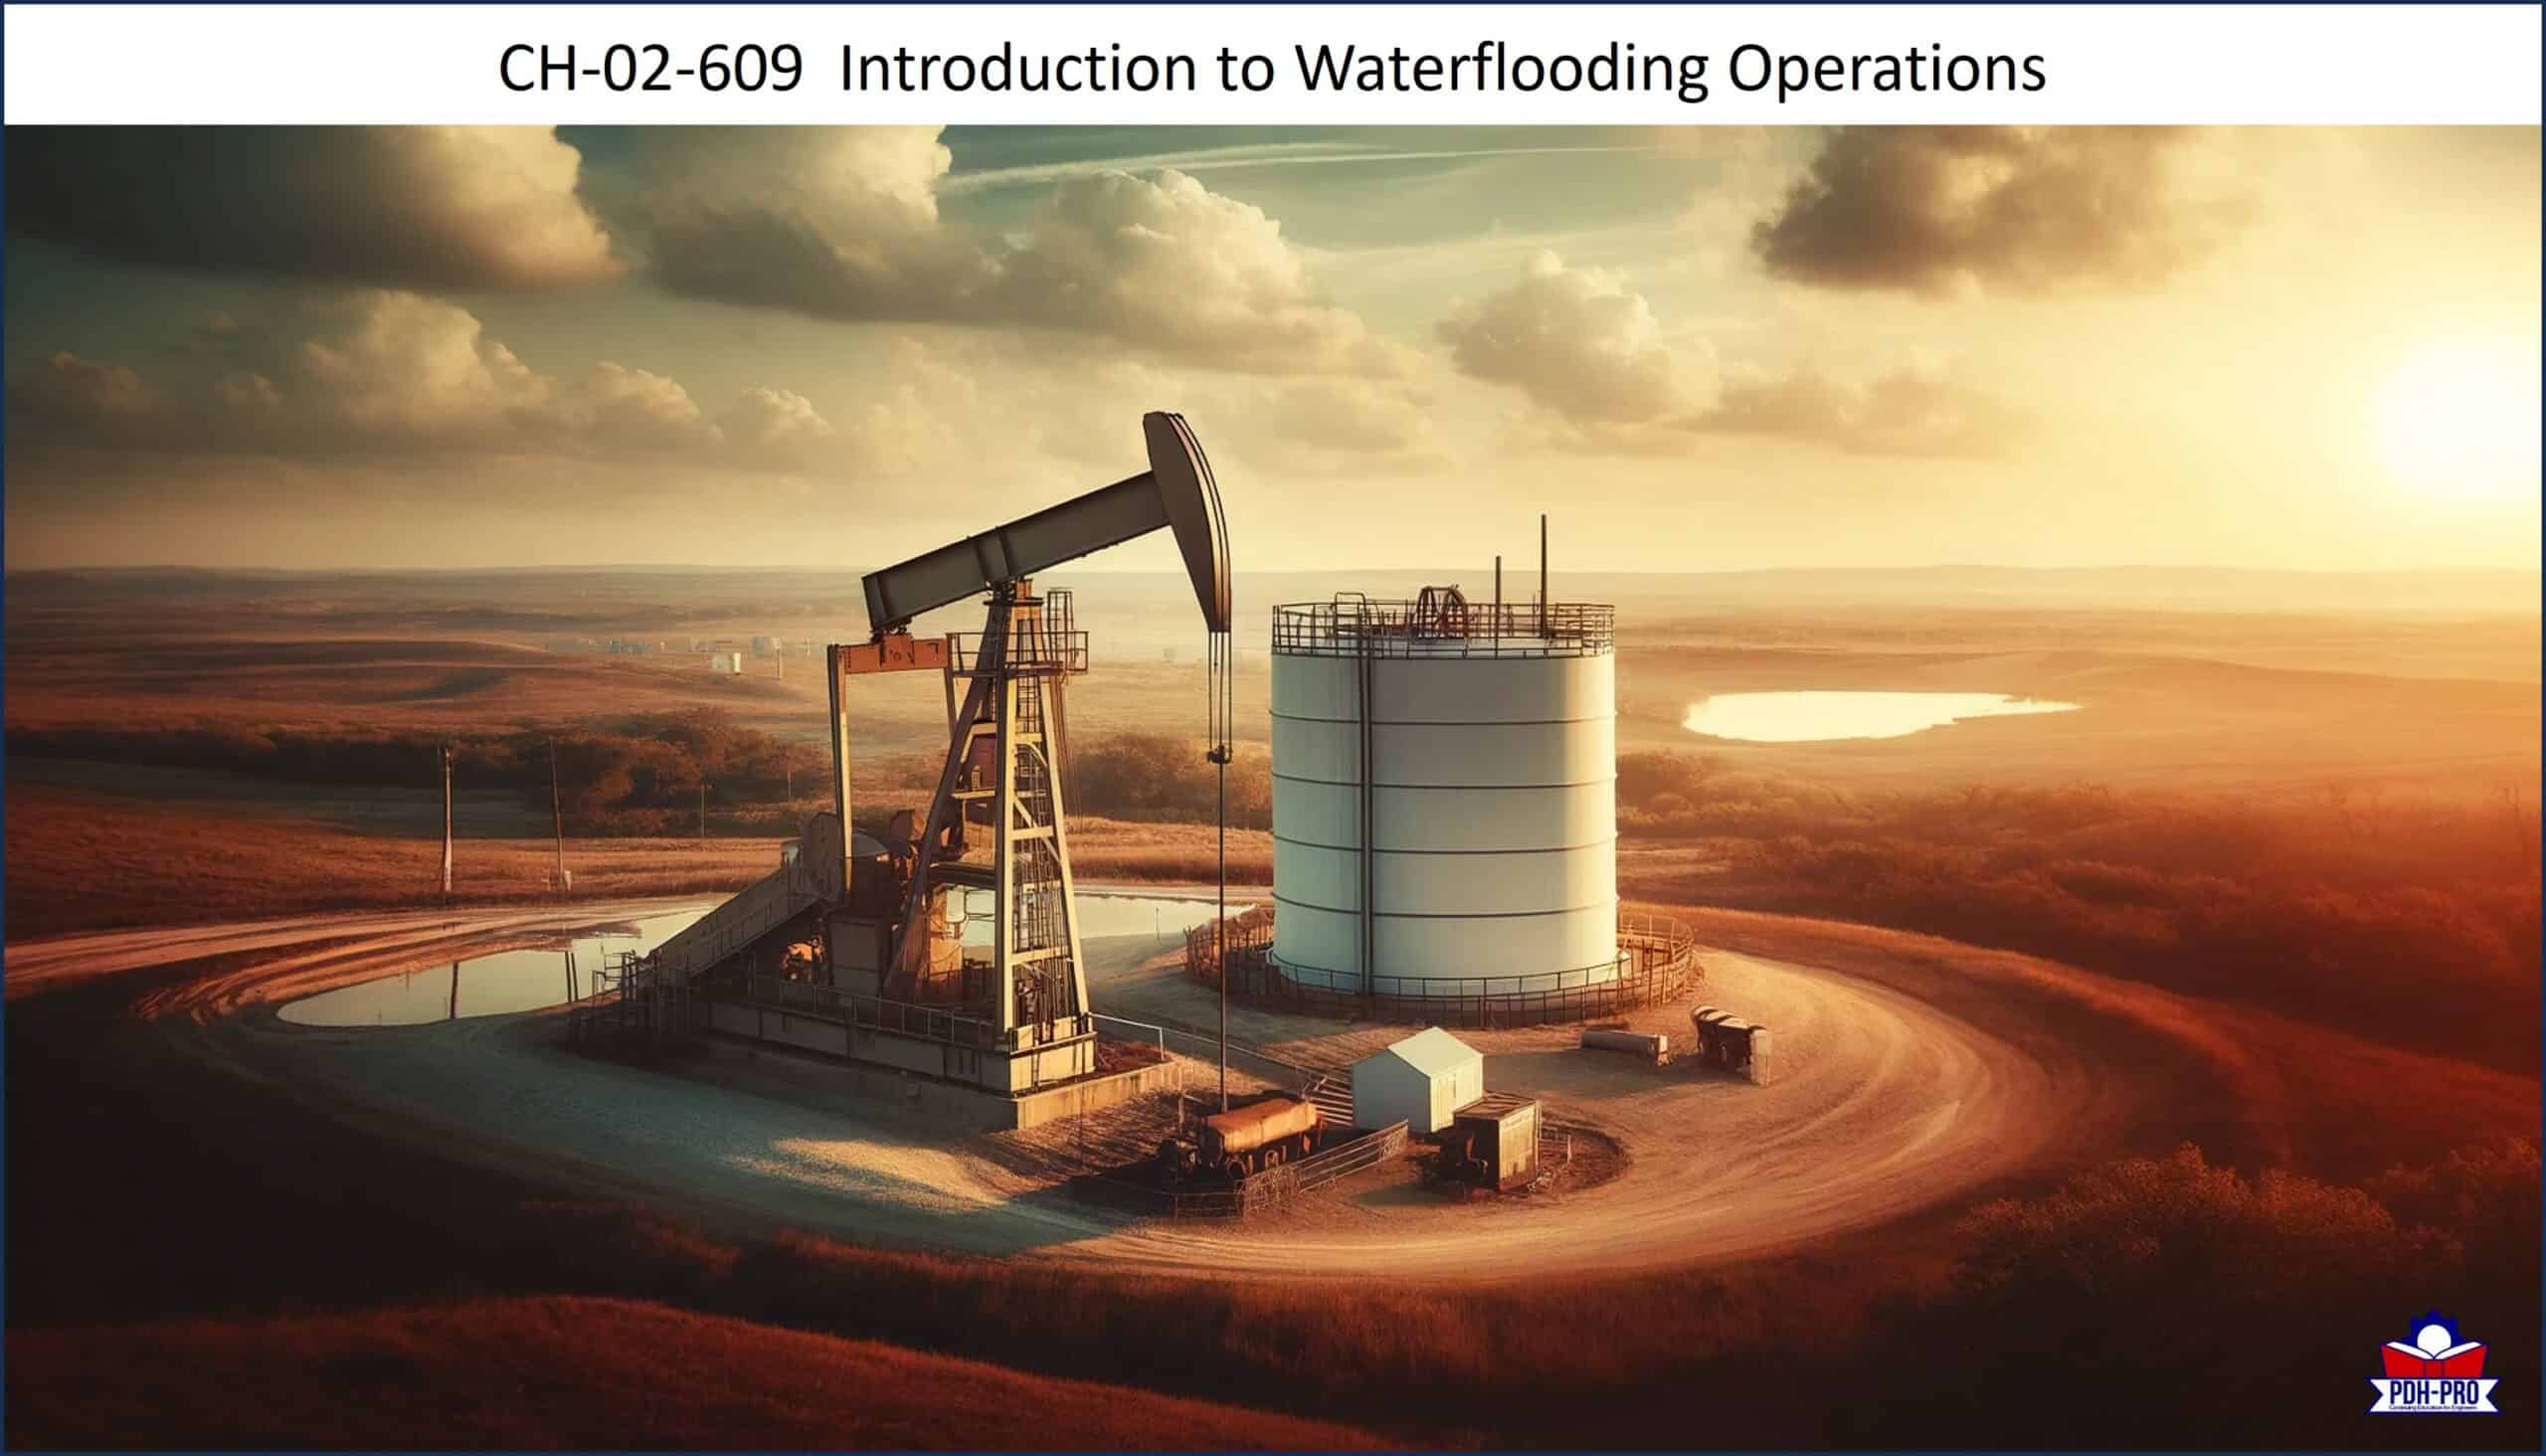 Introduction to Waterflooding Operations